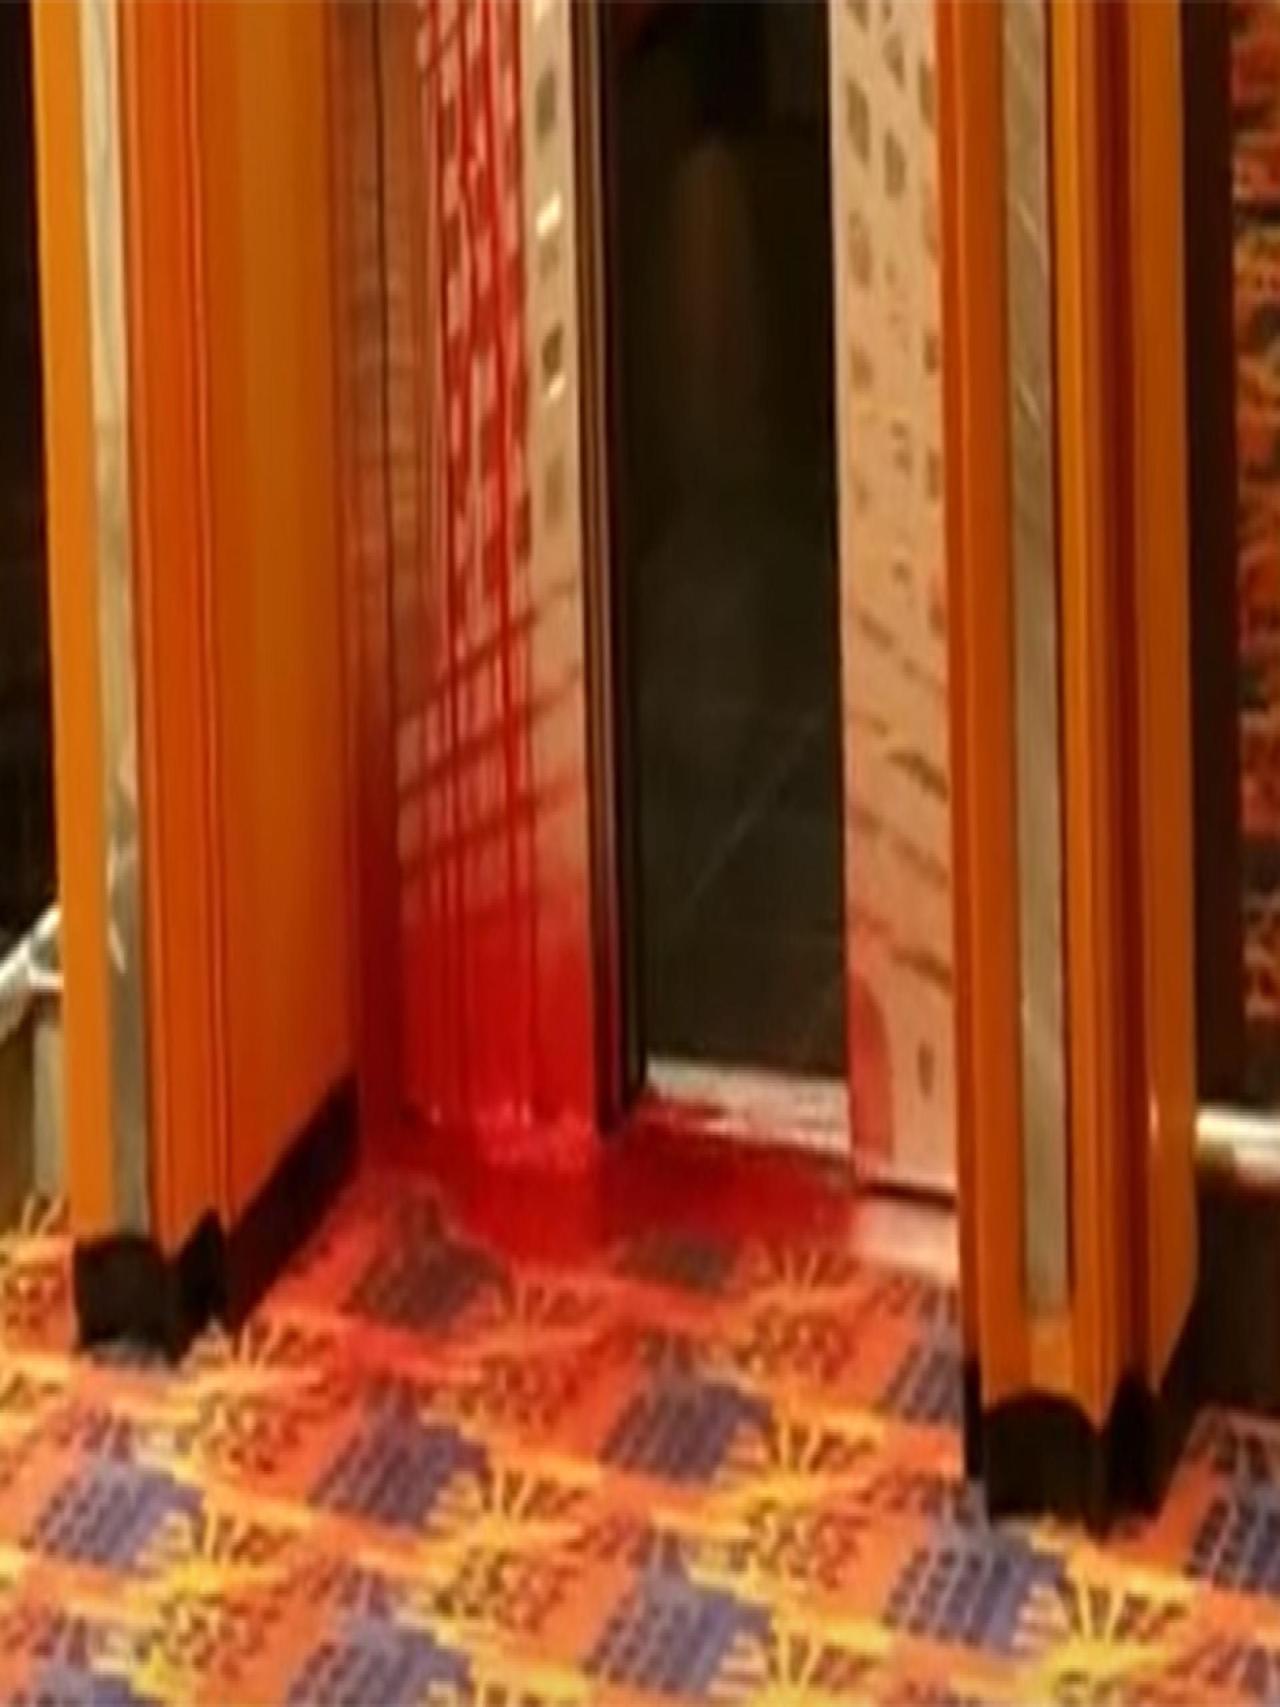 congenitaldisease:
“While this photo may look like a scene from a horror movie, it’s 100% real. Guests aboard the Carnival Ecstasy cruise ship were horrified to discover blood oozing from an elevator on 27 December, 2015. 66-year-old electrician,...